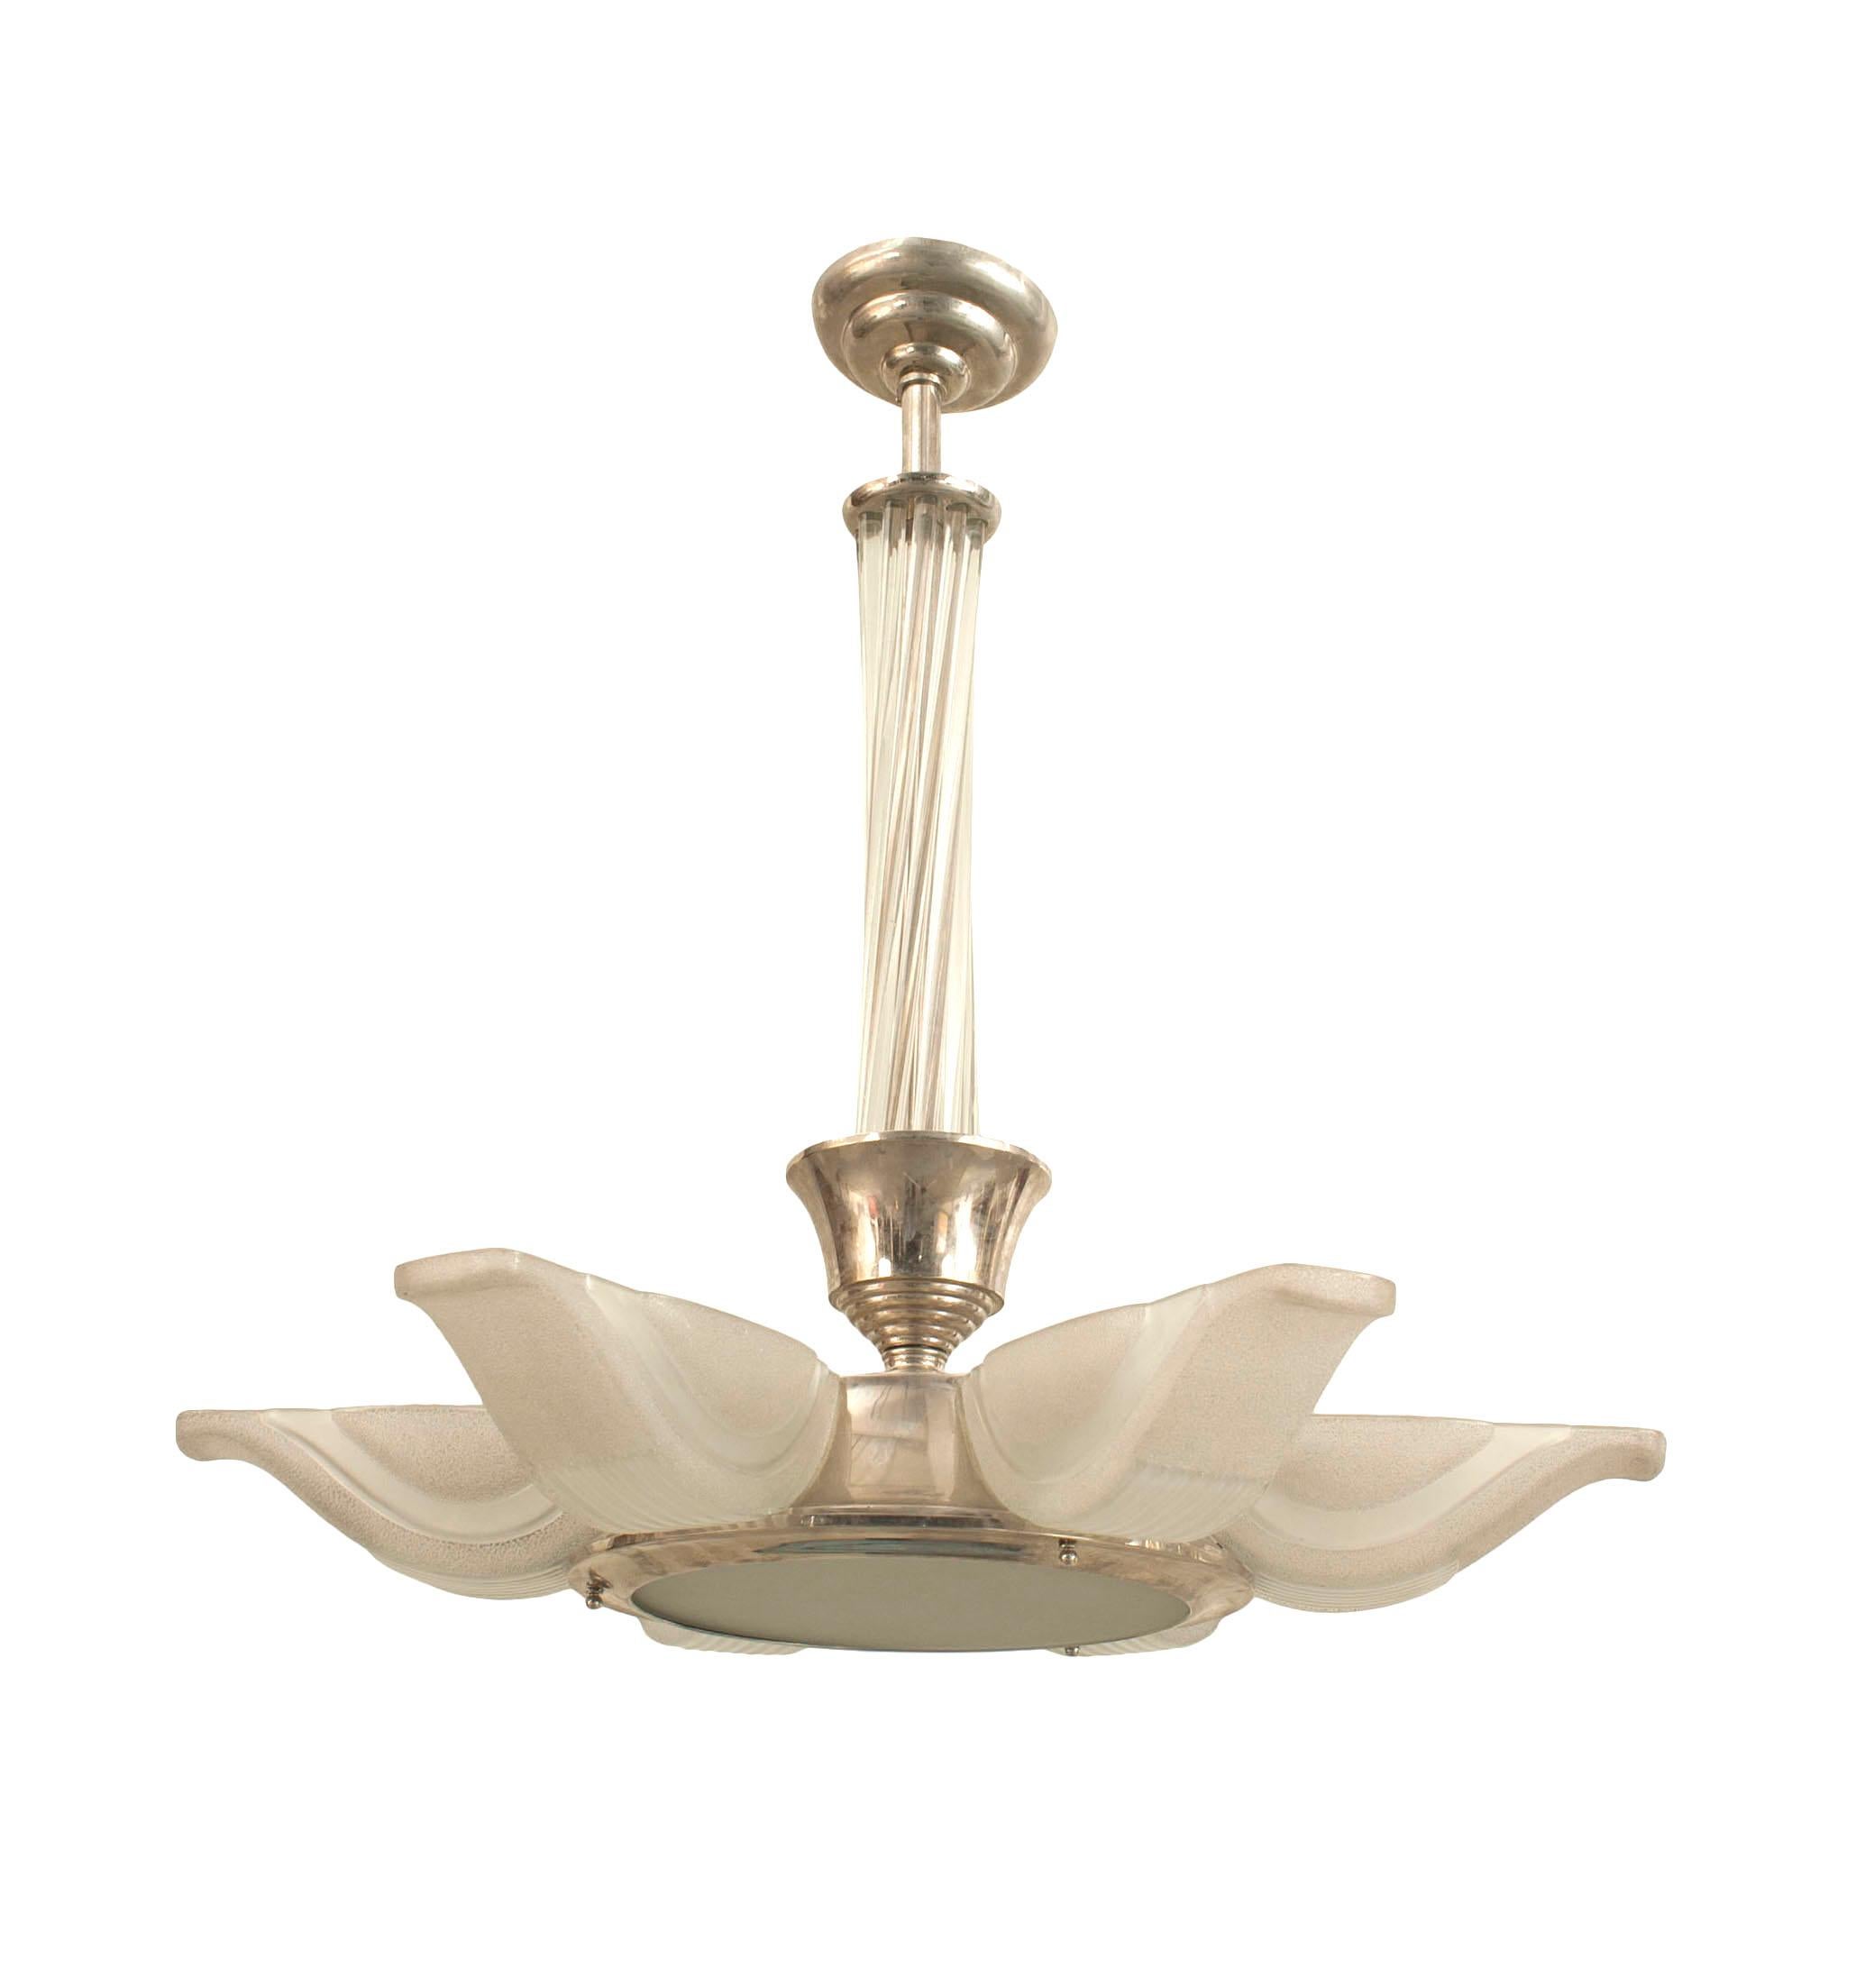 French Art Deco chandelier with six frosted glass shades having a fluted design bottom emanating from a chrome round frame with a clear swirl glass stem.

 